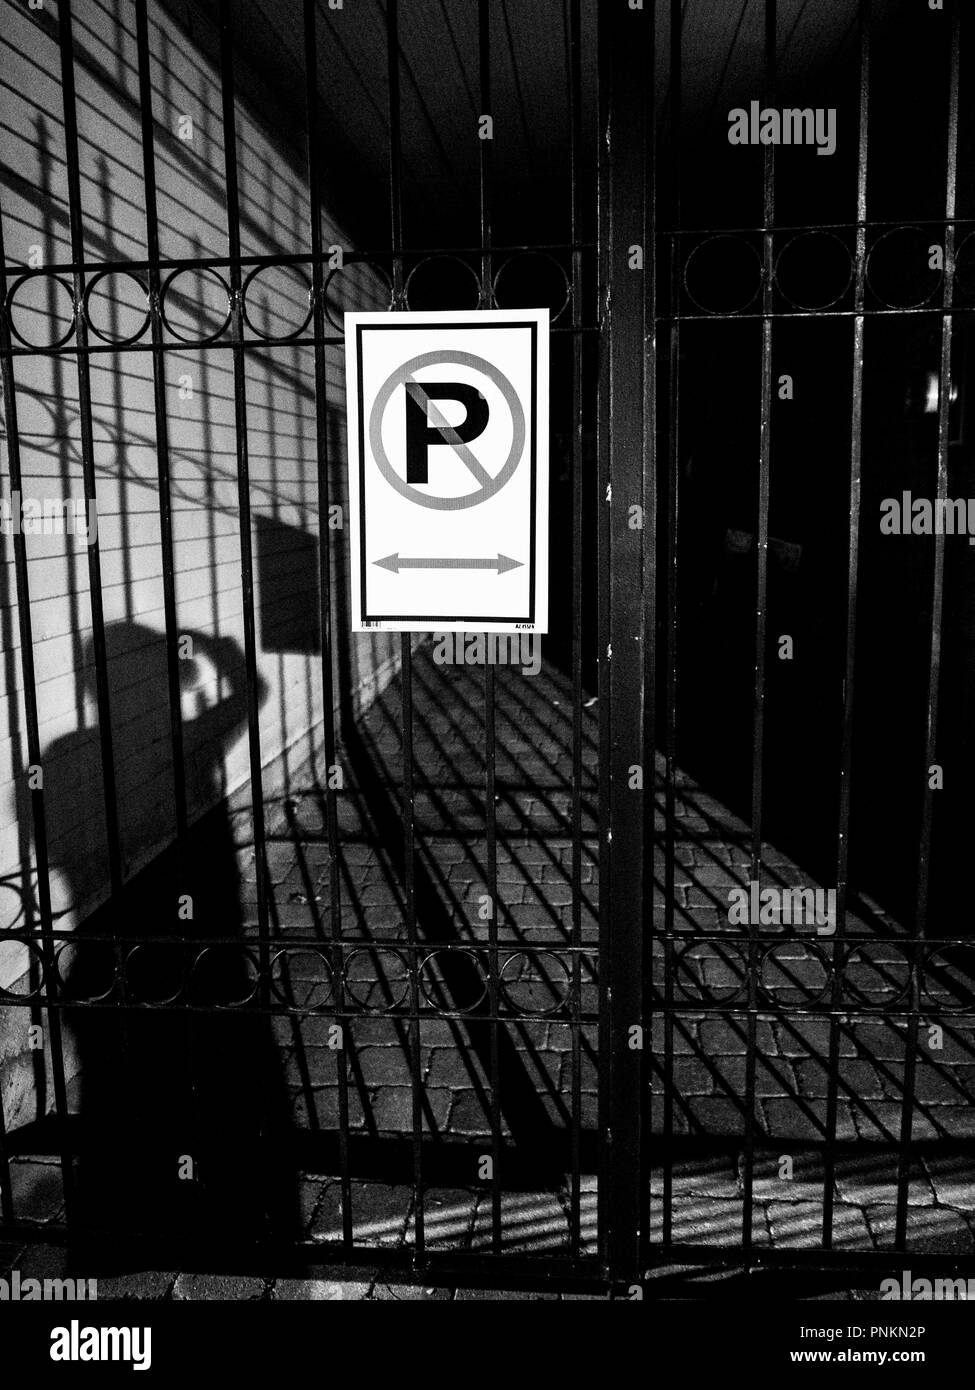 No parking sign on an entrance gate at night with shadows Stock Photo